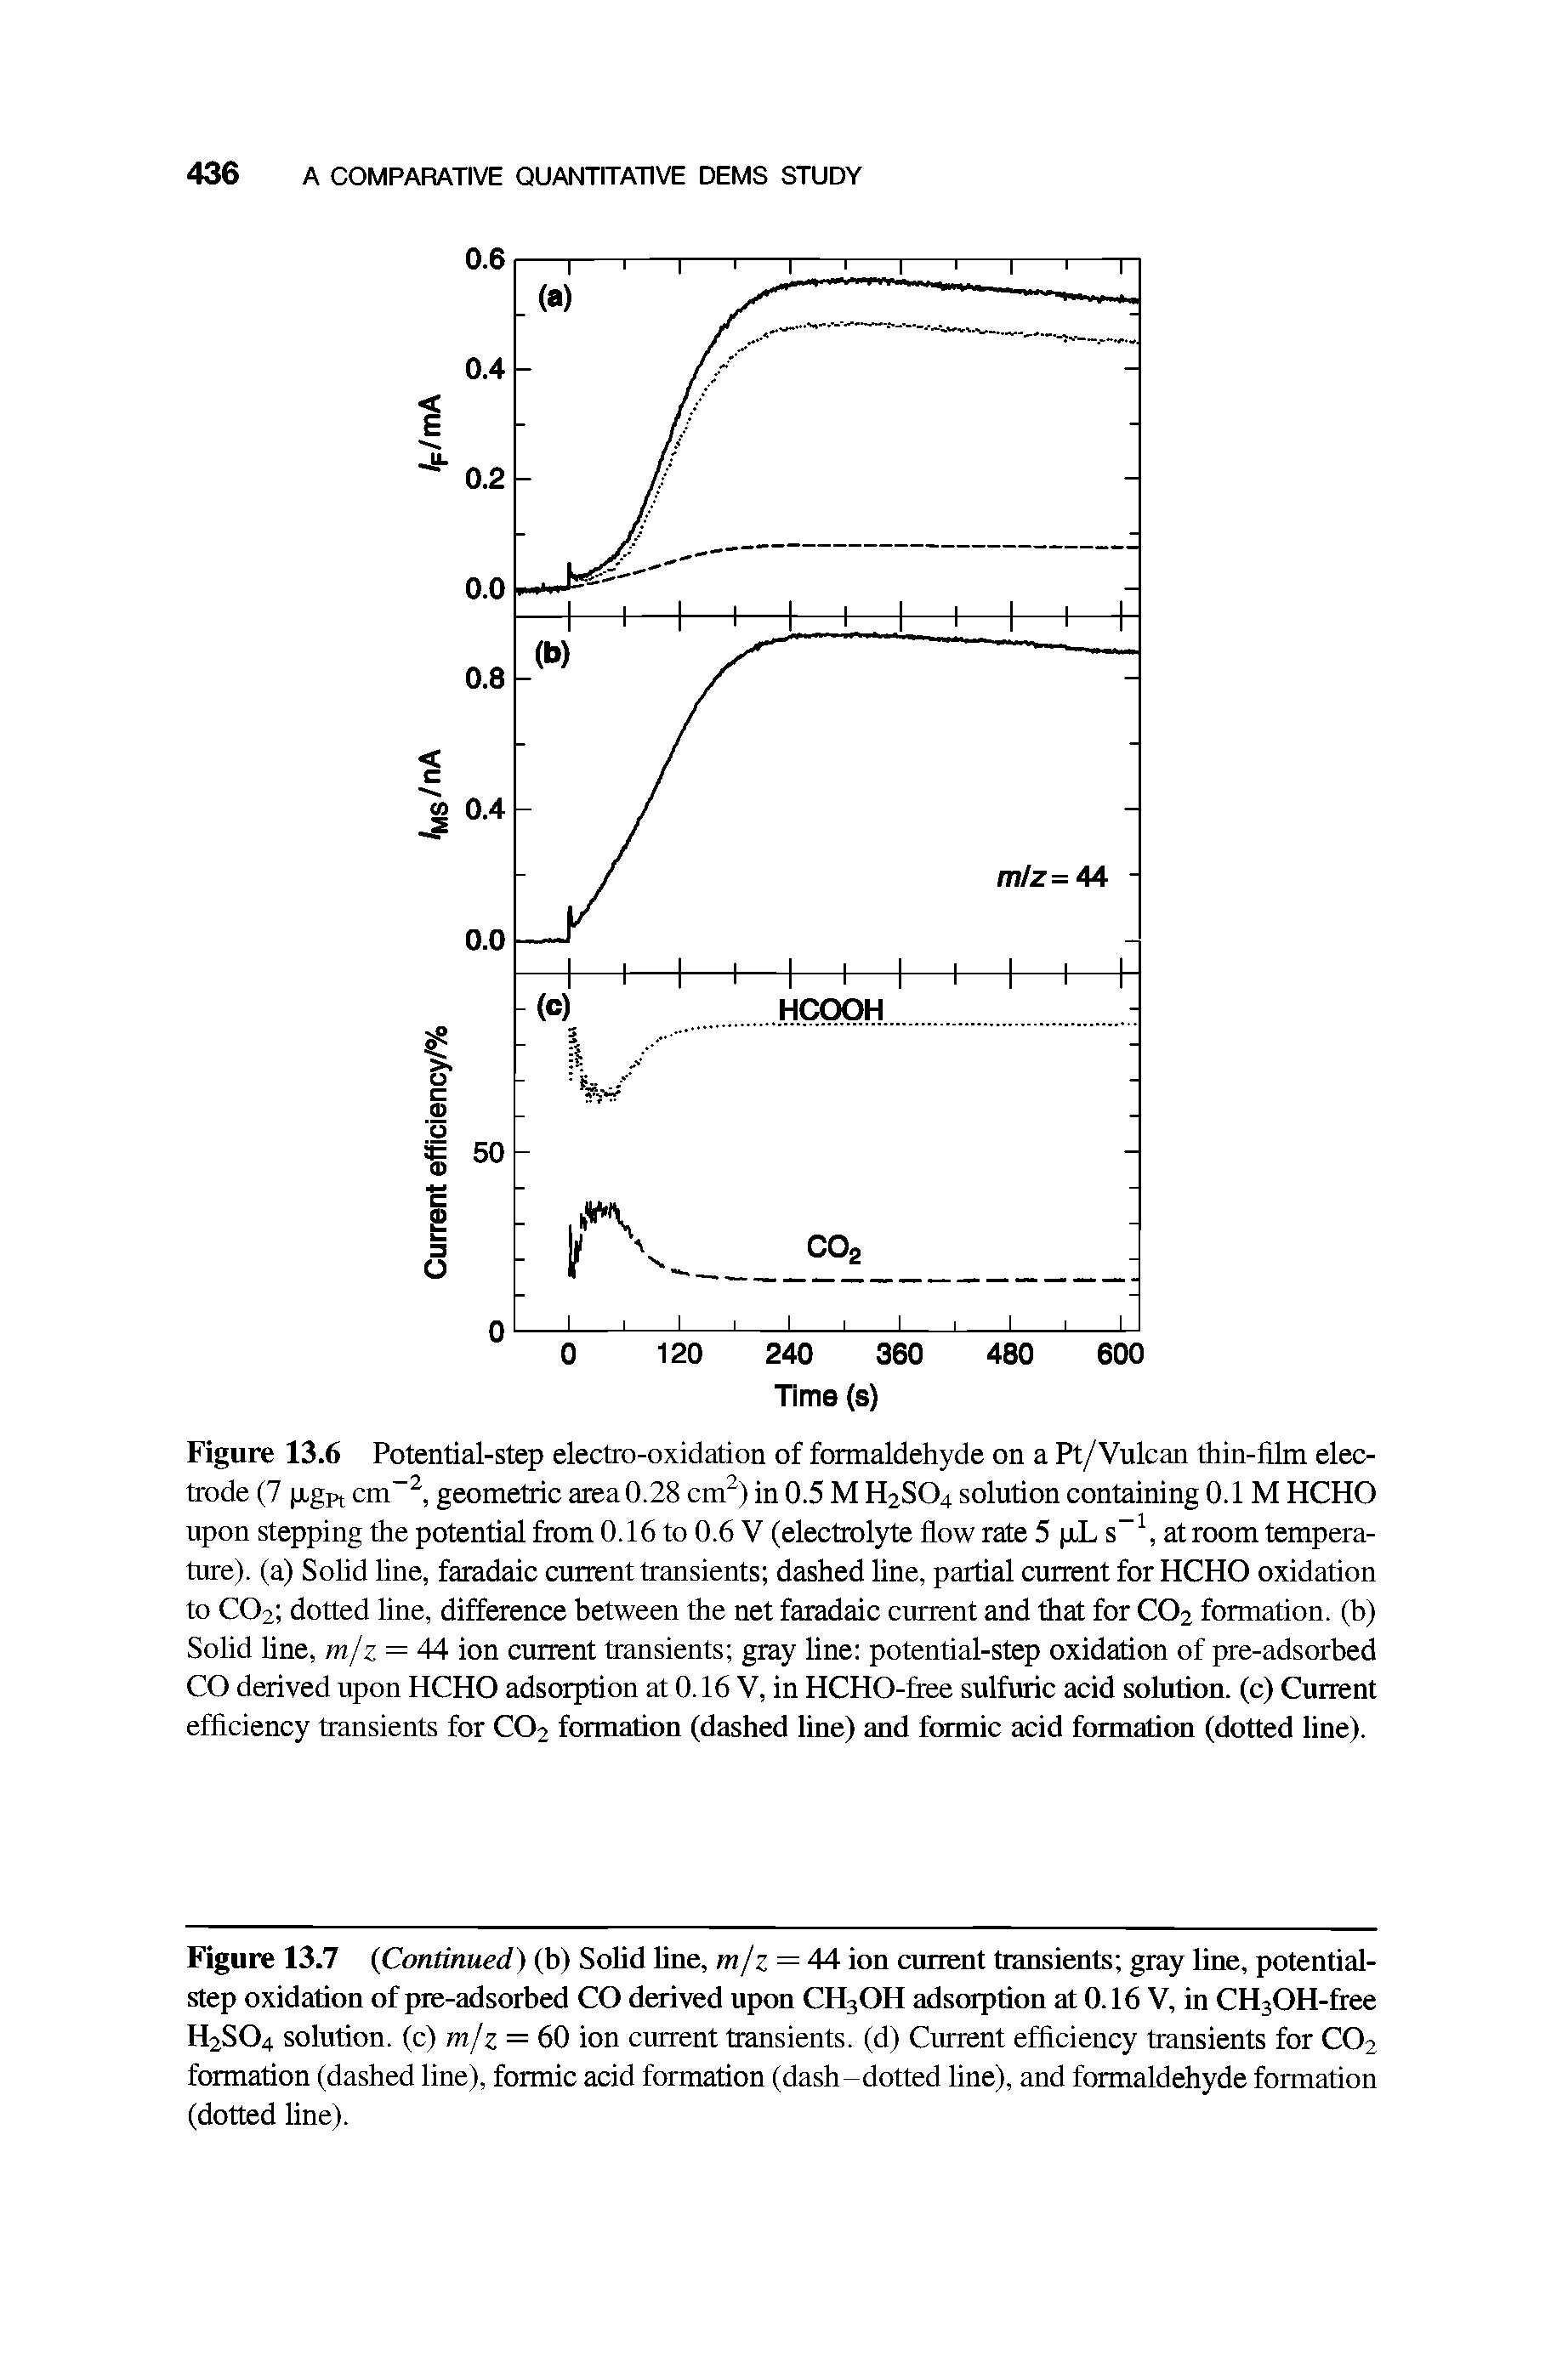 Figure 13.6 Potential-step electro-oxidation of formaldehyde on a Pt/Vulcan thin-film electrode (7 p,gpt cm, geometric area 0.28 cm ) in 0.5 M H2SO4 solution containing 0.1 M HCHO upon stepping the potential from 0.16 to 0.6 V (electrolyte flow rate 5 pL at room temperature). (a) Solid line, faradaic current transients dashed line, partial current for HCHO oxidation to CO2 dotted line, difference between the net faradaic current and that for CO2 formation, (b) Solid line, m/z = 44 ion current transients gray line potential-step oxidation of pre-adsorbed CO derived upon HCHO adsorption at 0.16 V, in HCHO-free sulfuric acid solution, (c) Current efficiency transients for CO2 formation (dashed line) and formic acid formation (dotted line).